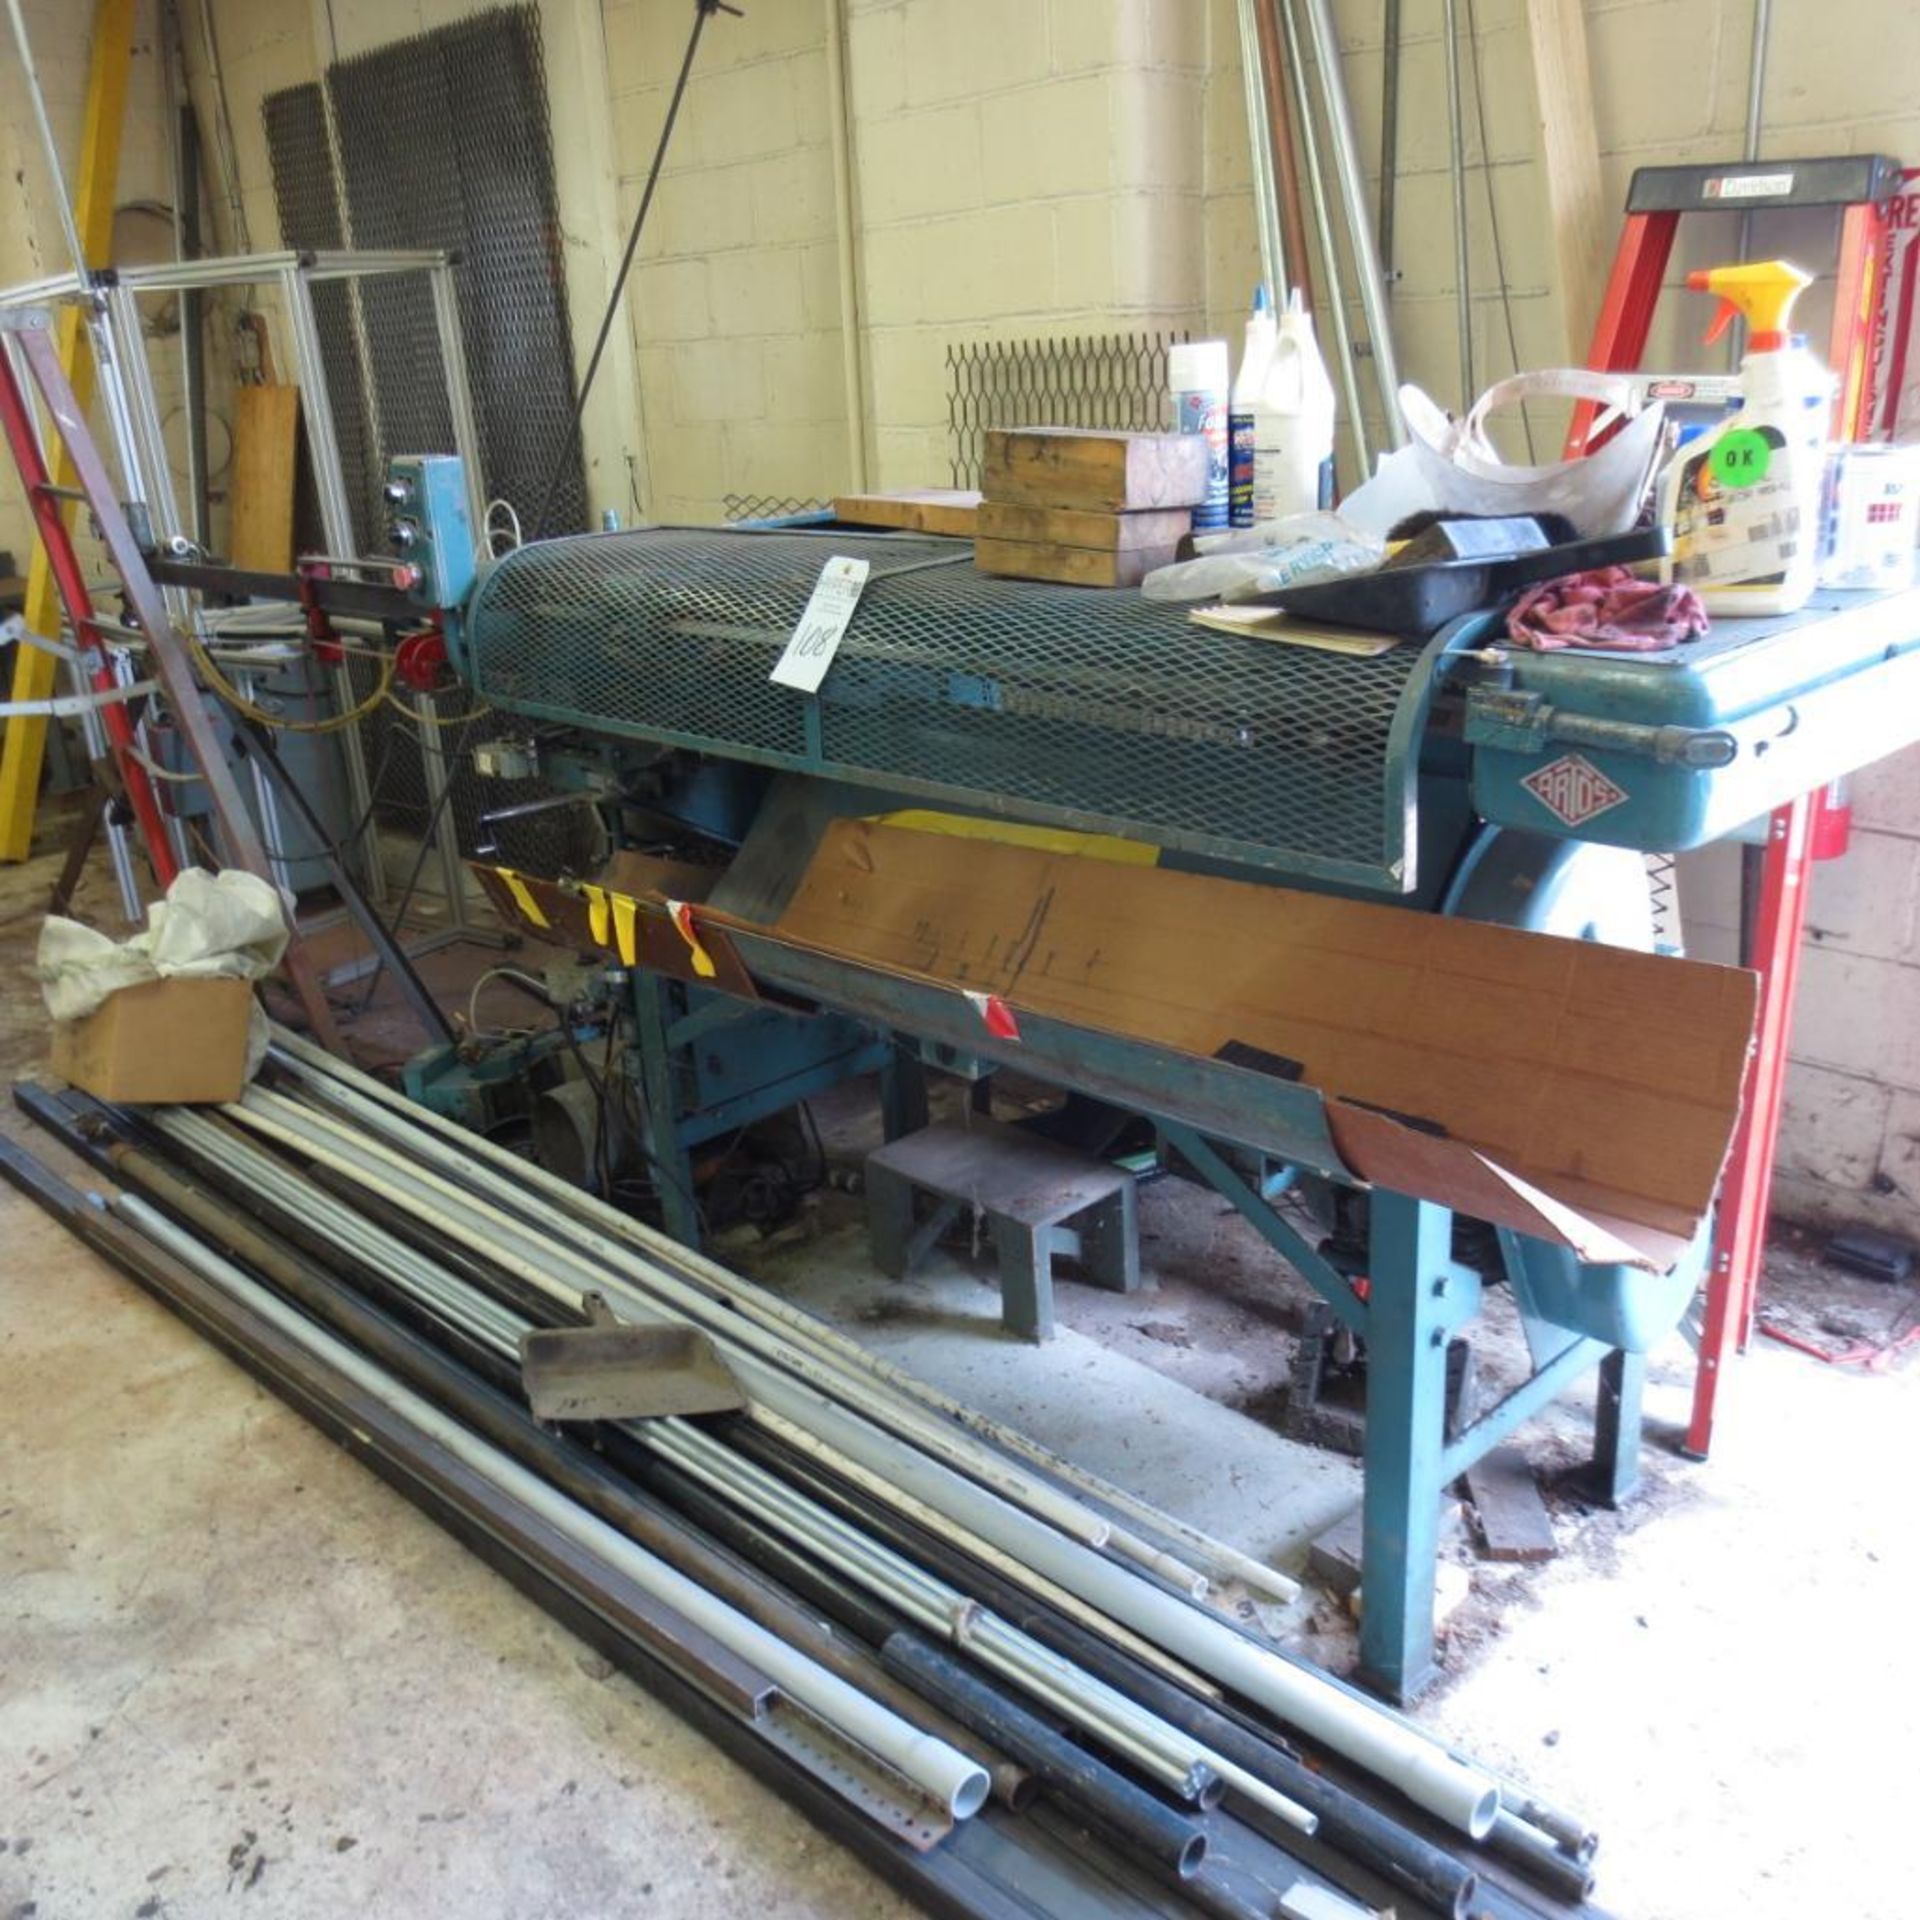 Artos Wire Striping Machine located at 707 Burlington Ave Logansport, IN 46947